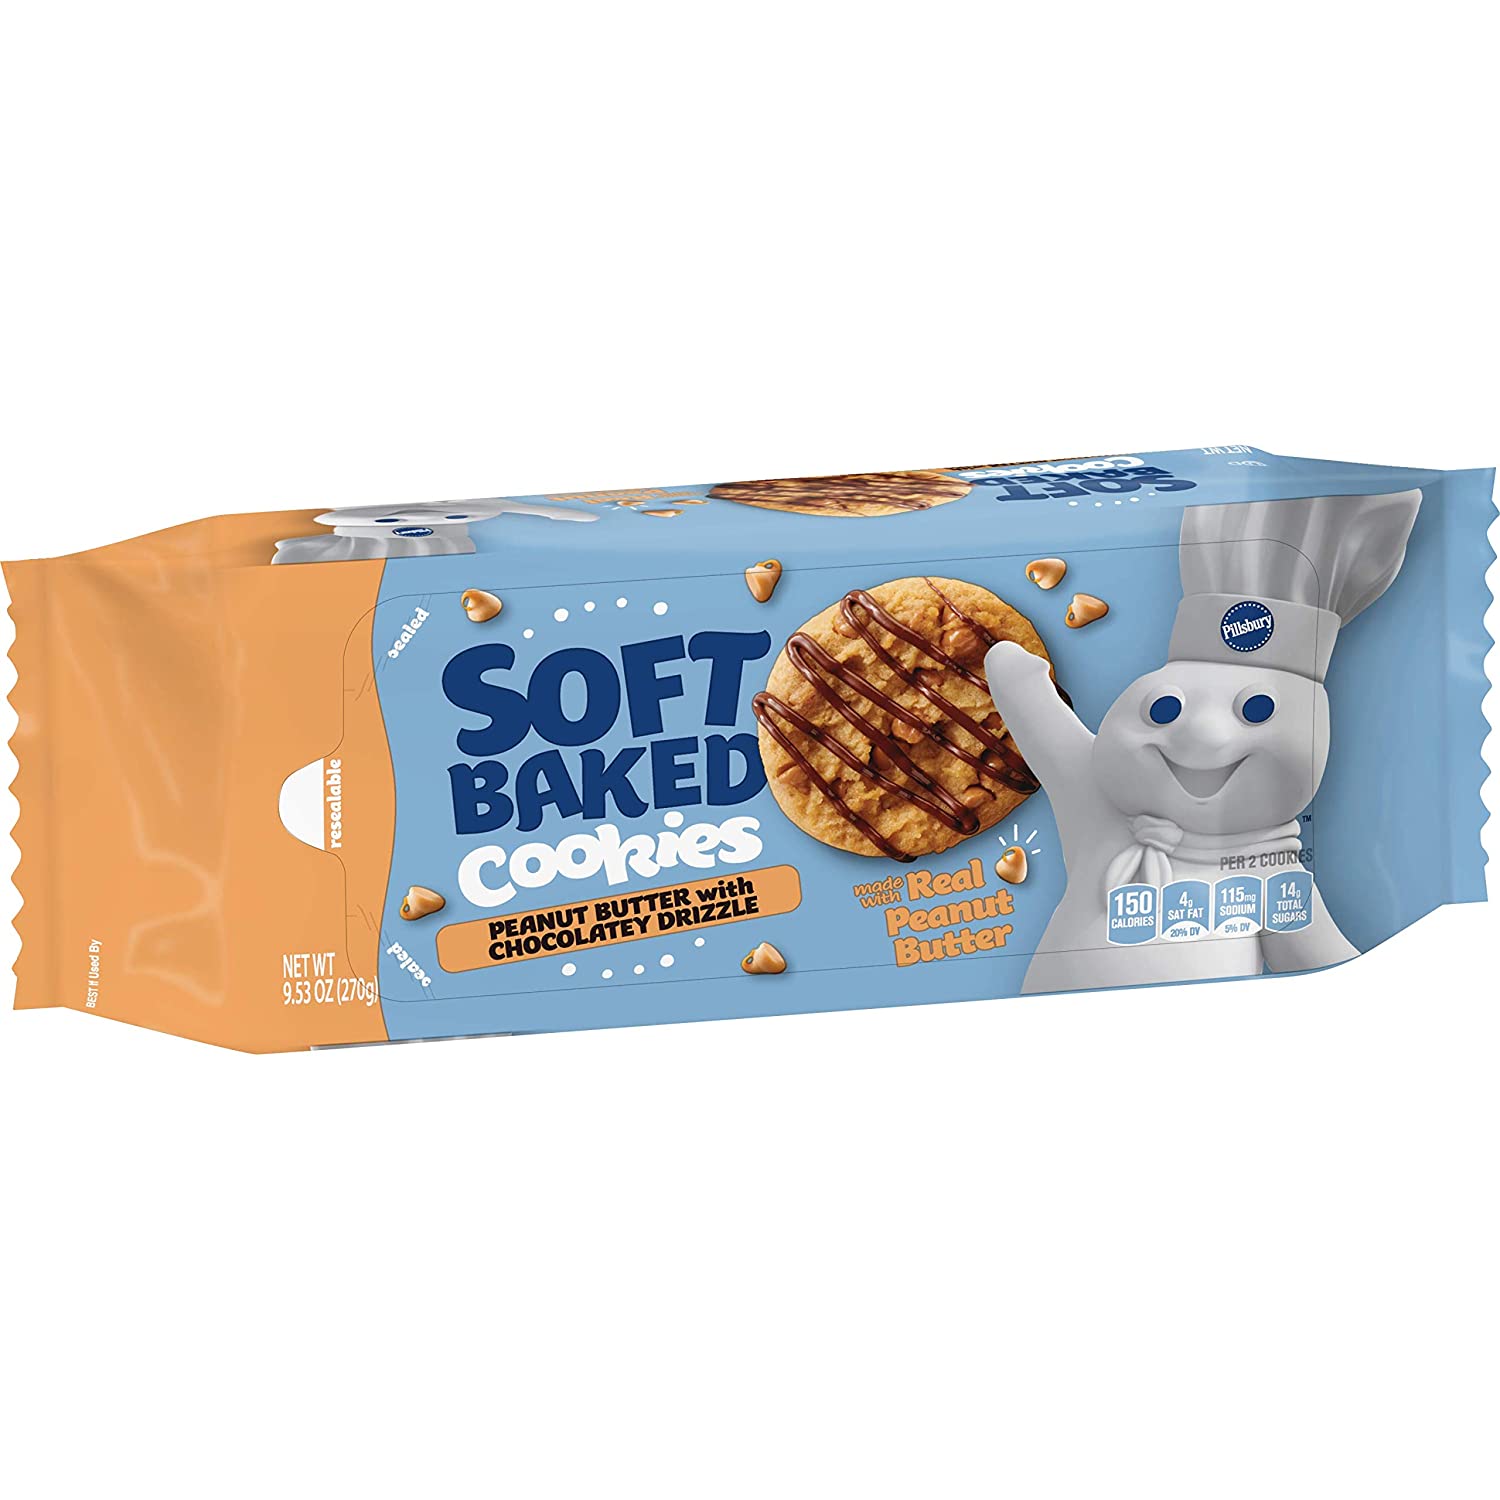 18 count Pillsbury Soft Baked Cookies, (Peanut butter, chocolate chip, birthday cake) $1.40 - $1.47, free shipping for Prime, Amazon